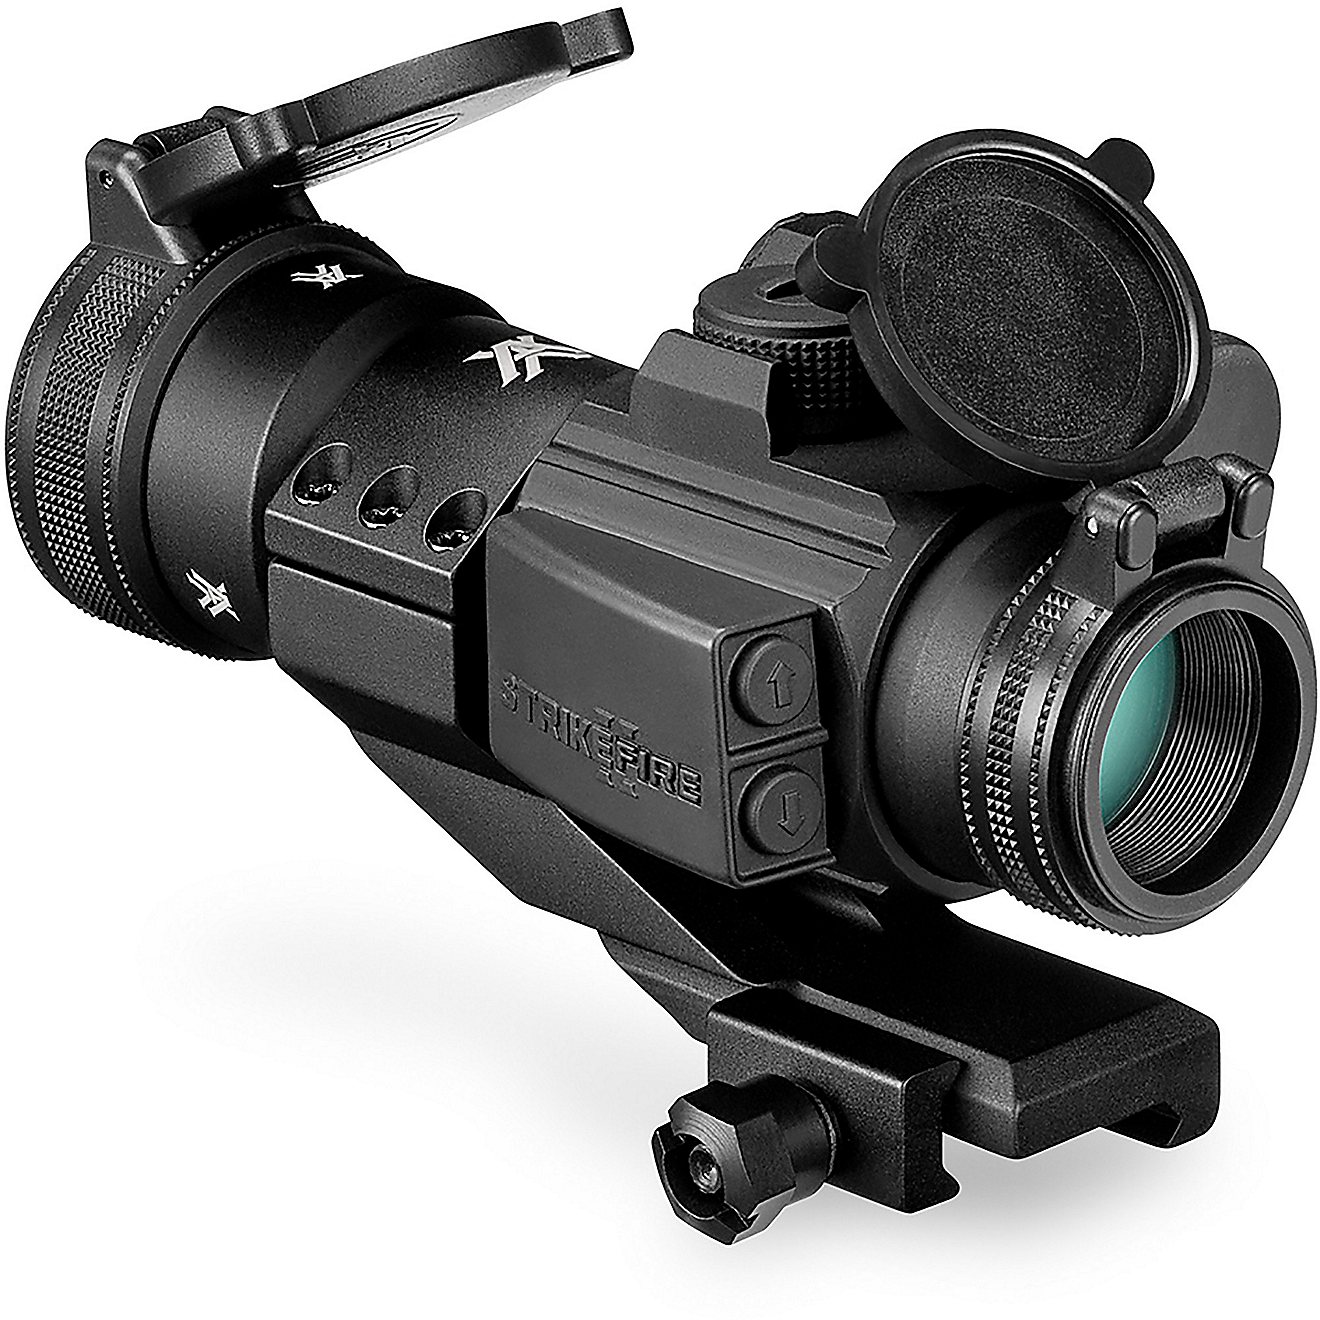 Vortex StrikeFire II 4 MOA Red Dot Sight                                                                                         - view number 2